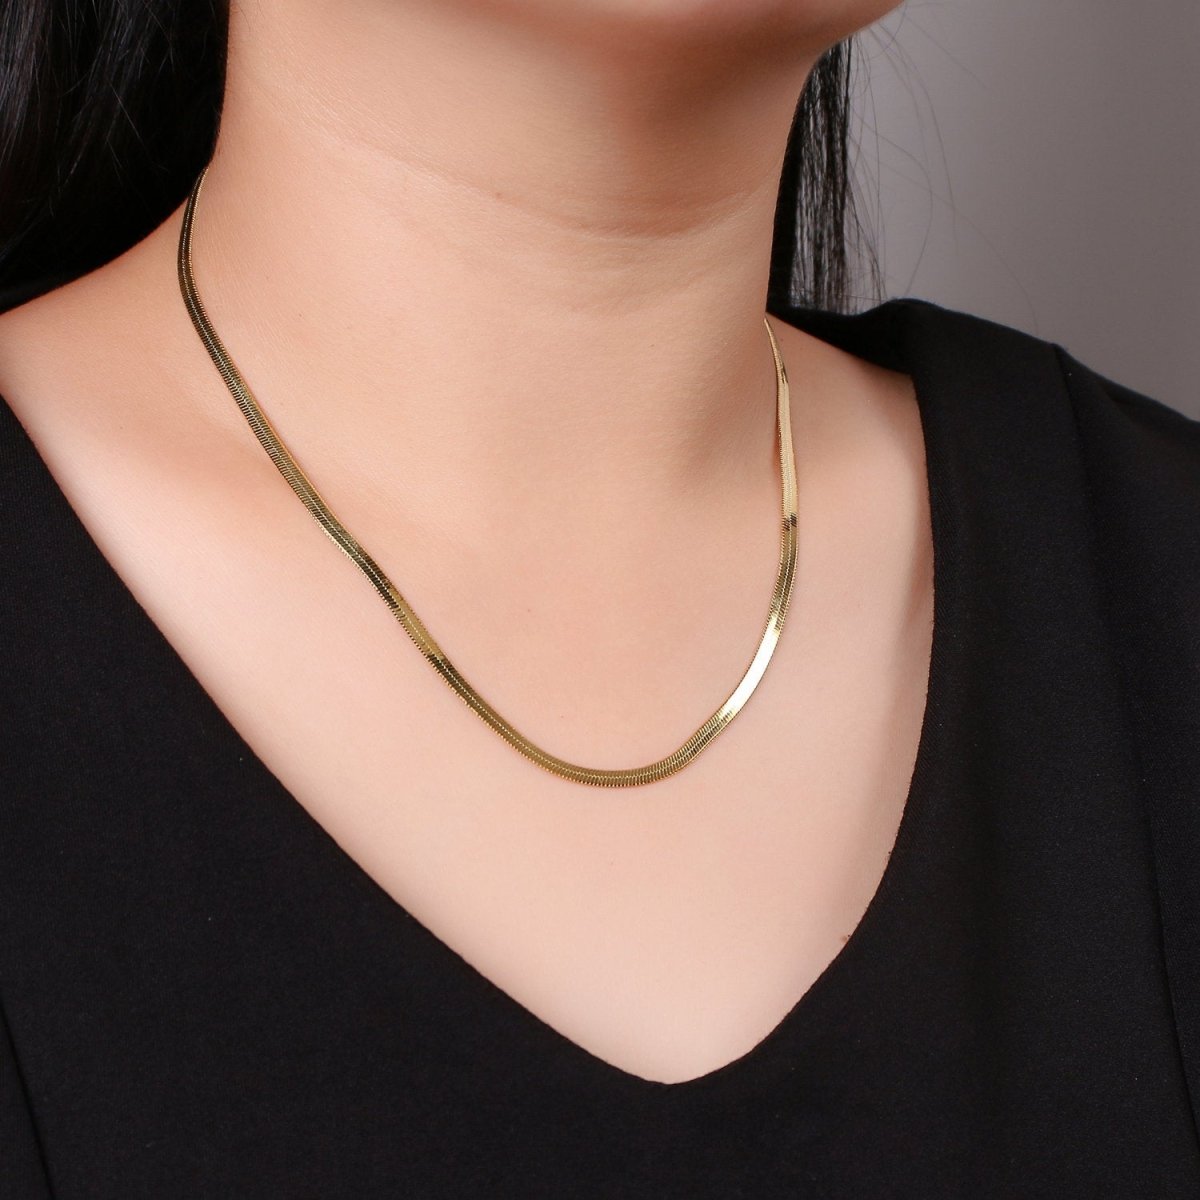 Vermeil Herringbone Chain Gold Plated over Sterling Silver Bold Necklace 3, 4, 5mm wide Herringbone Chain for Layering Necklace 16, 18, 20 Inch | CN-766 - CN-781, 930, 931, 932, 949, 950, 970 Clearance Pricing - DLUXCA